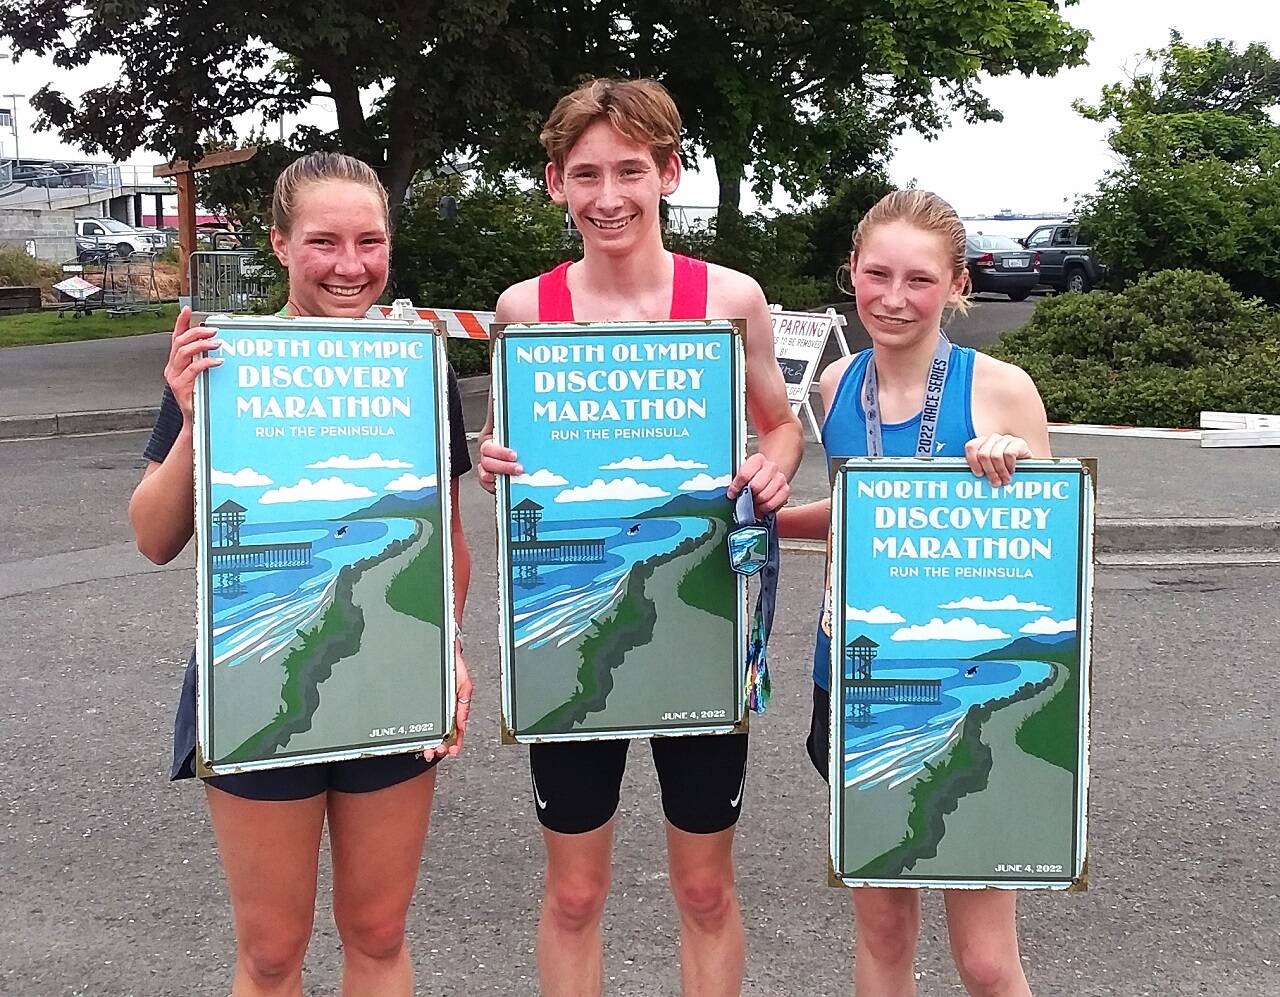 Lauren Larson, Langdon Larson and Leia Larson celebrate their victories at the North Olympic Discovery Marathon. Lauren won the women's 10K, Langdon the men's 10K and Leia the women's 5K. (Pierre LaBossiere/Peninsula Daily News)